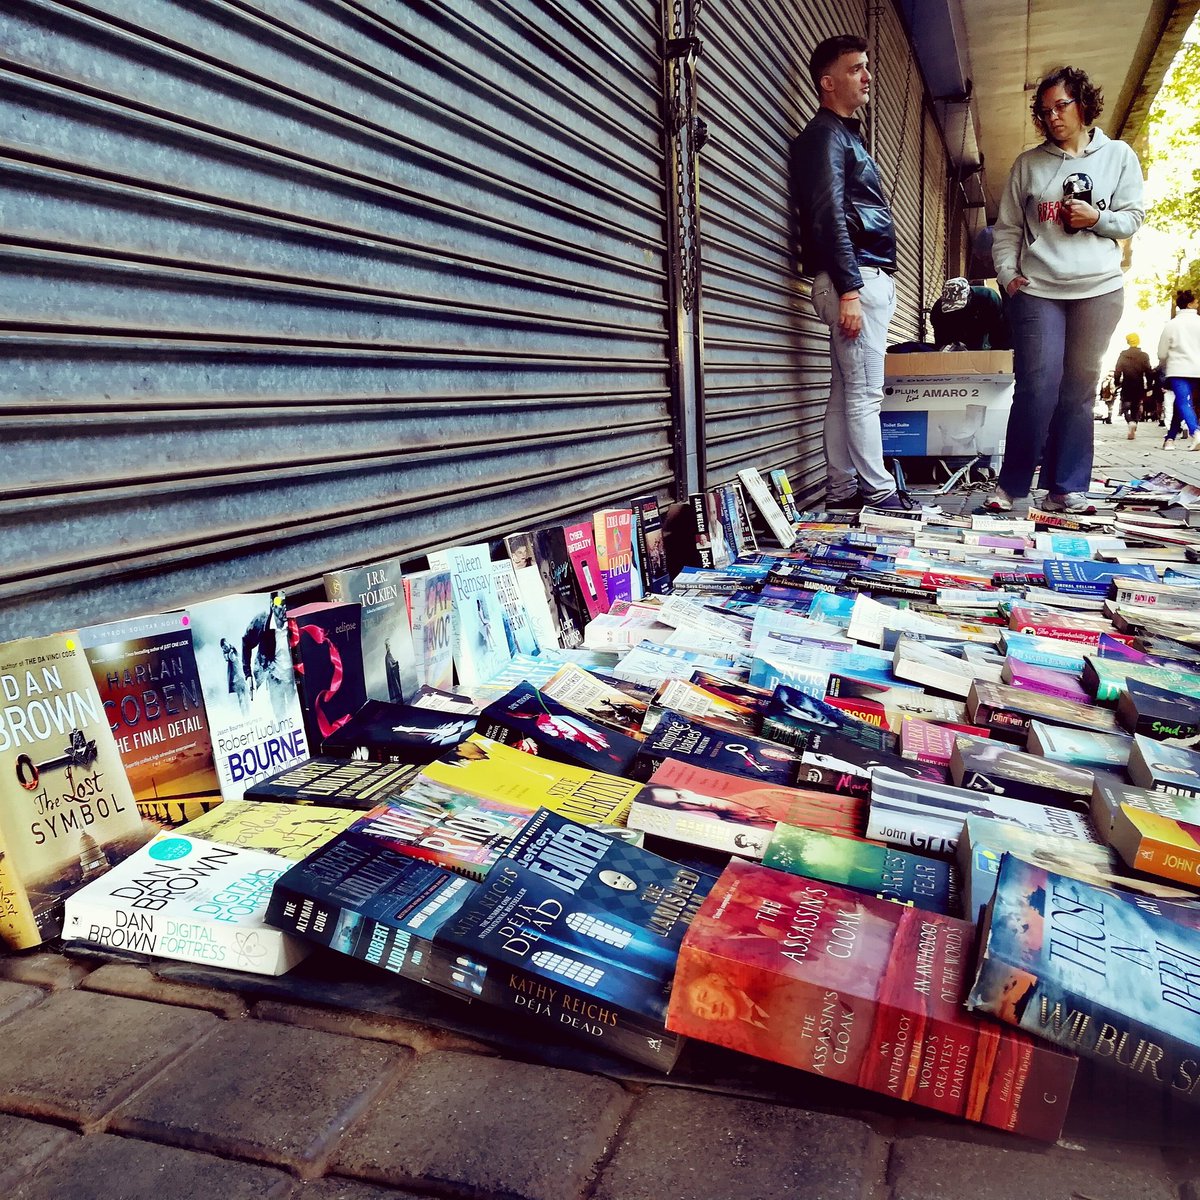 What do you need to be an underground book seller? BOOKS!!!

#JoziWalks #JoziWalks2018 #books #library #booksellers #joburg